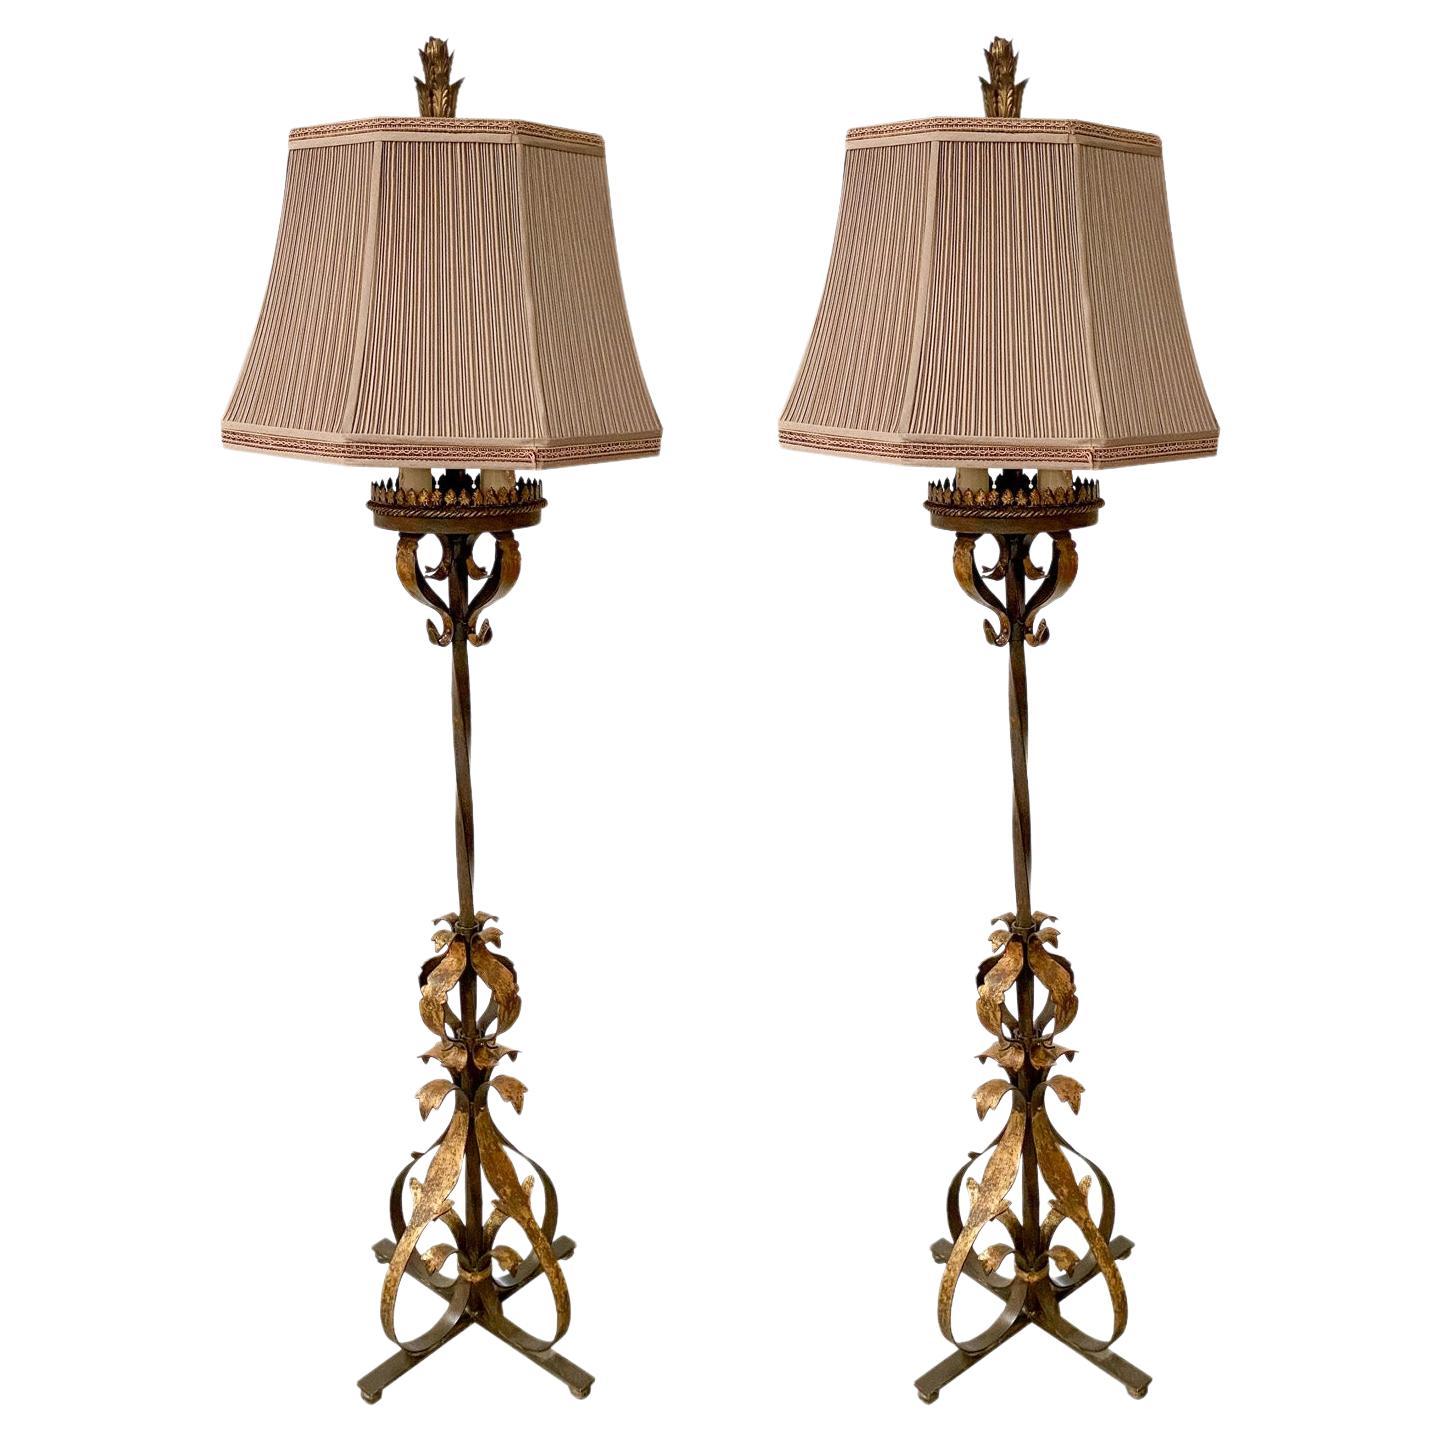 Spanish Baroque Style Wrought Iron Floor Lamp by Fine Art Lighting, a Pair  For Sale